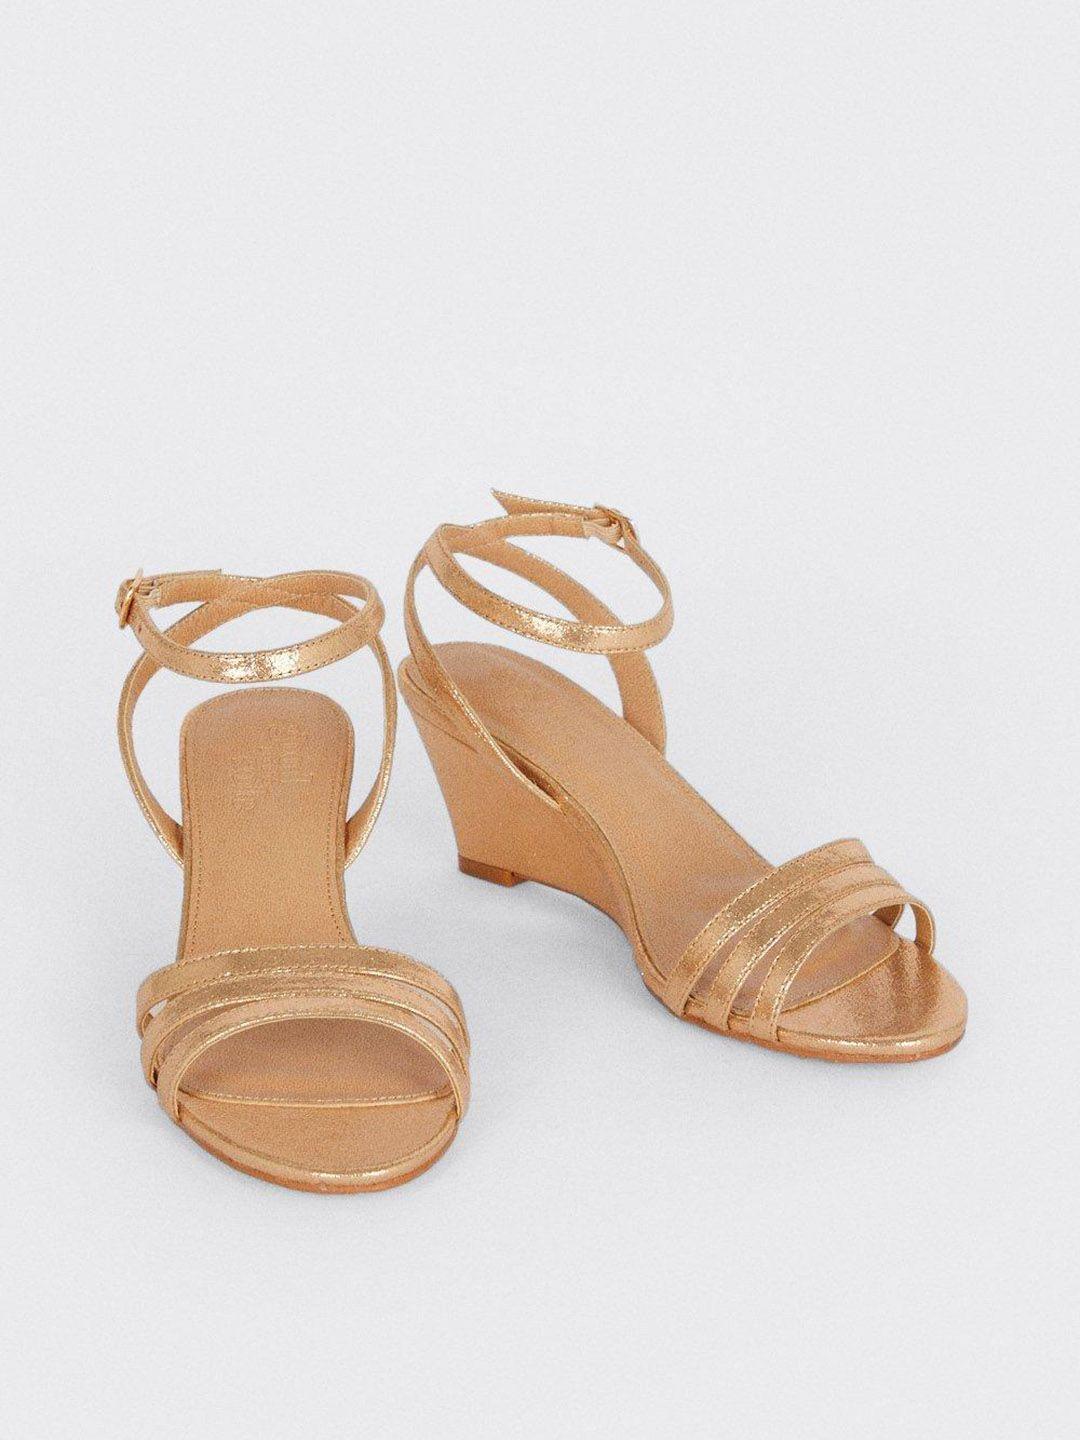 dorothy perkins gold-toned party wedge sandals